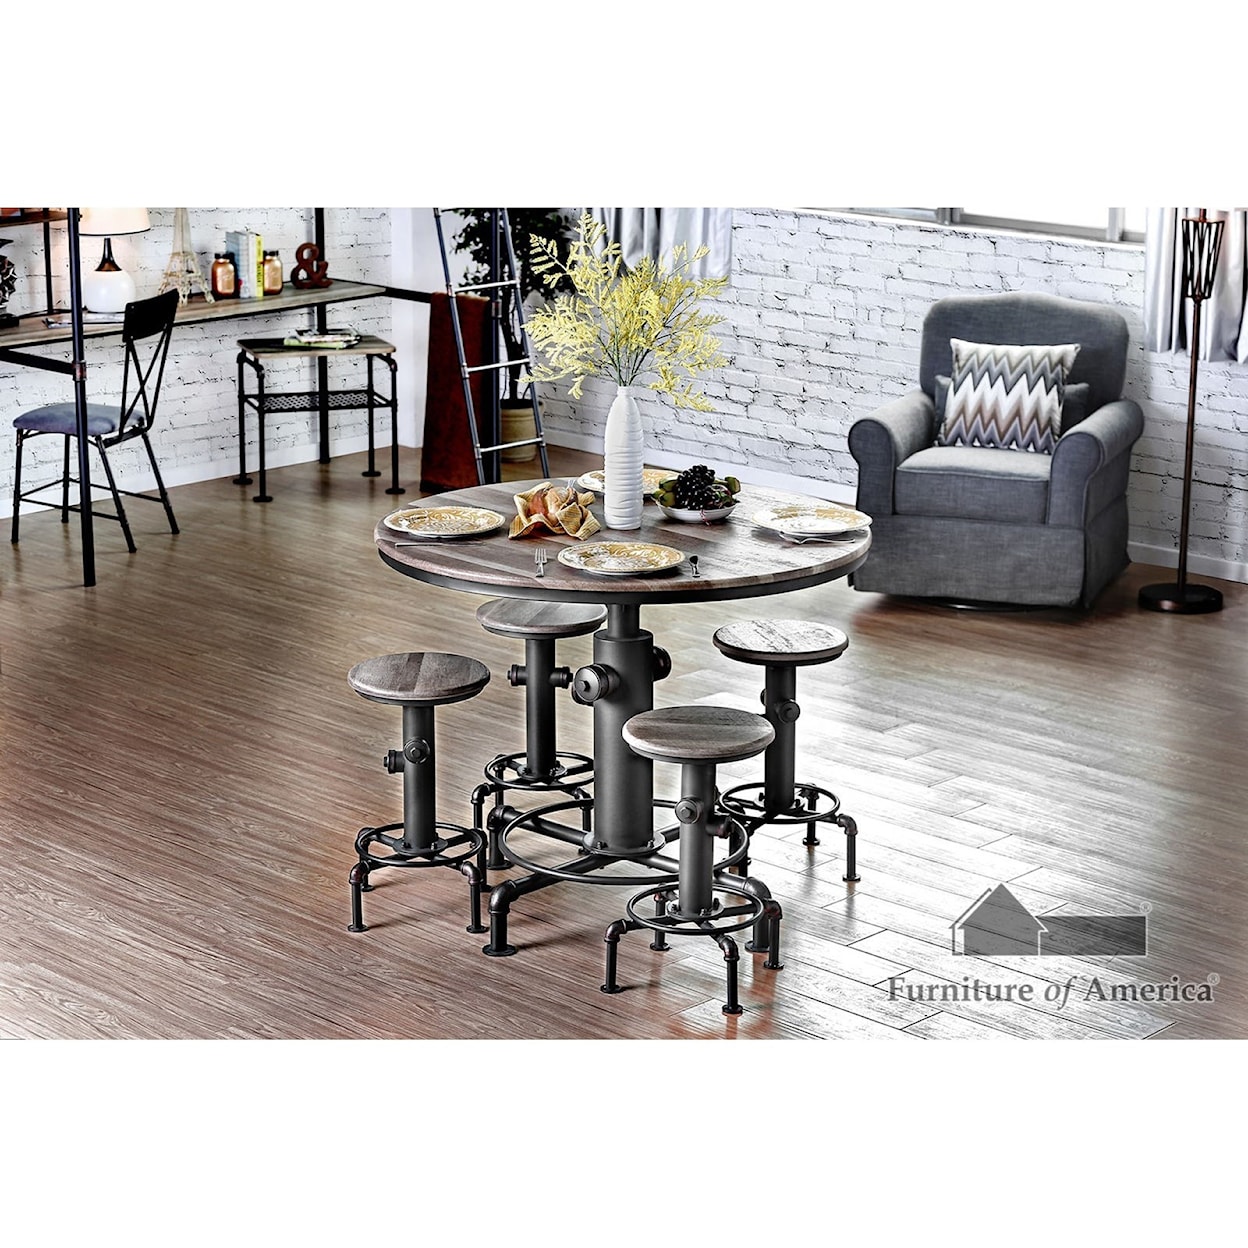 Furniture of America - FOA Foskey Table + 4 Chairs